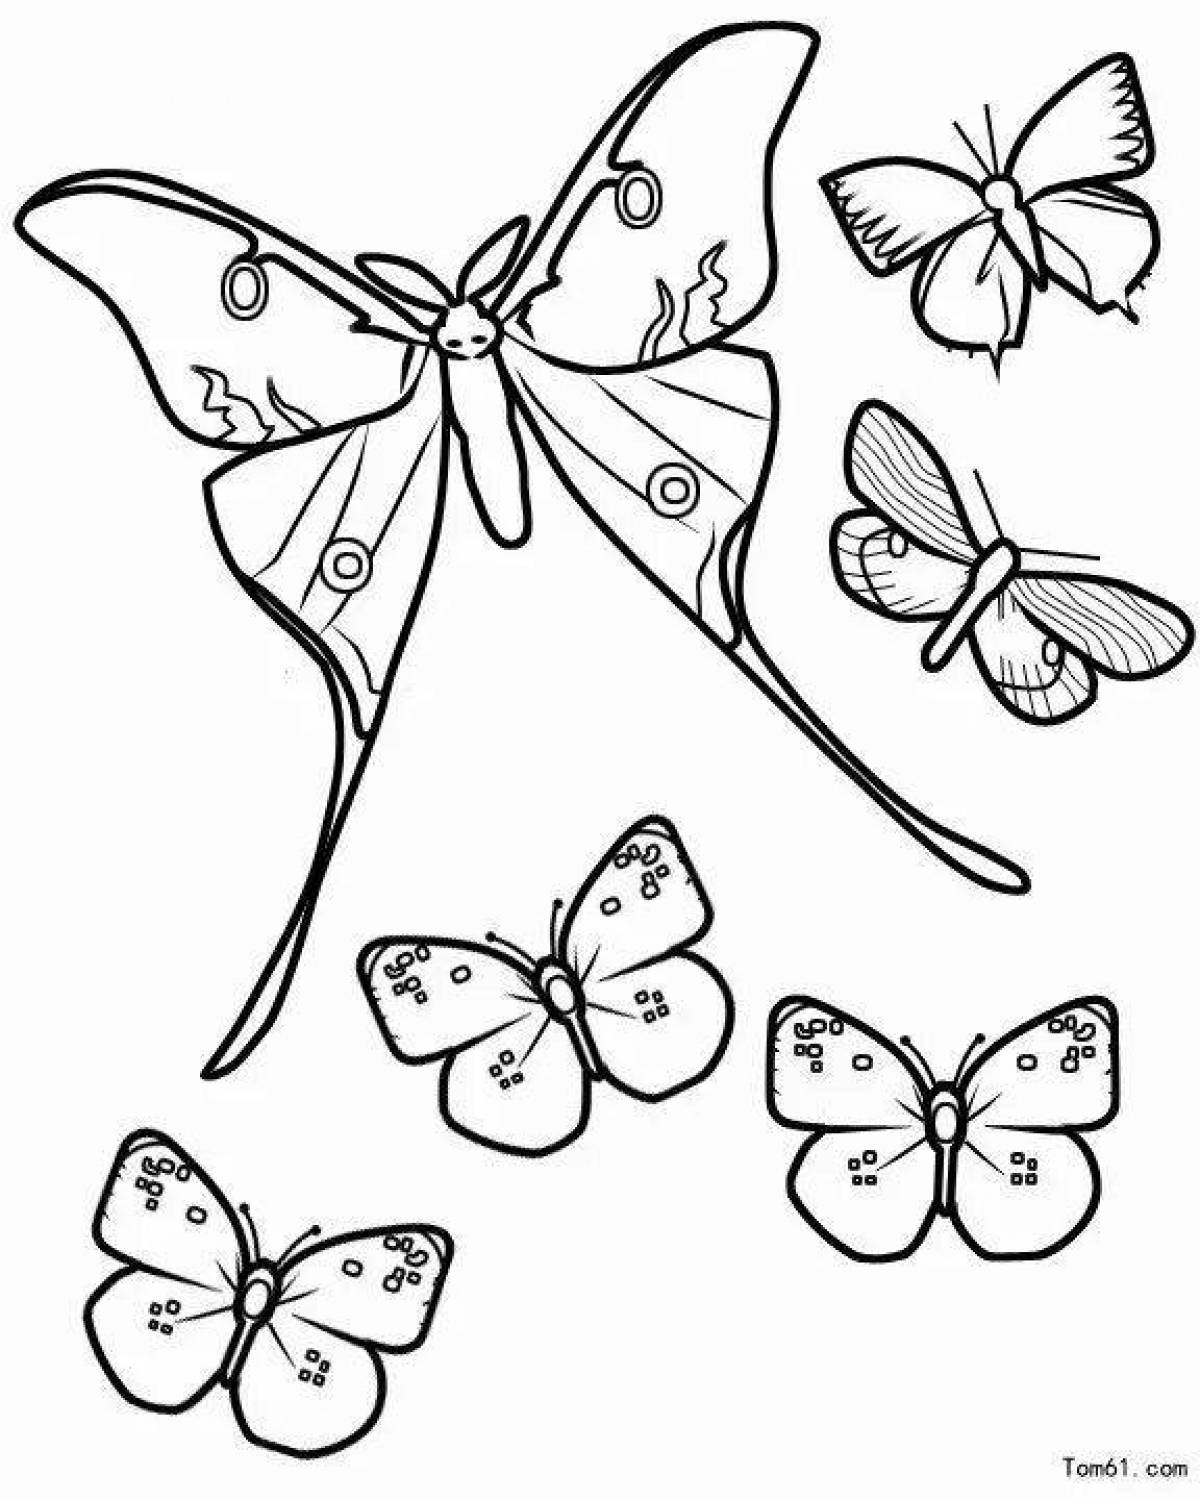 Sky butterfly coloring pages